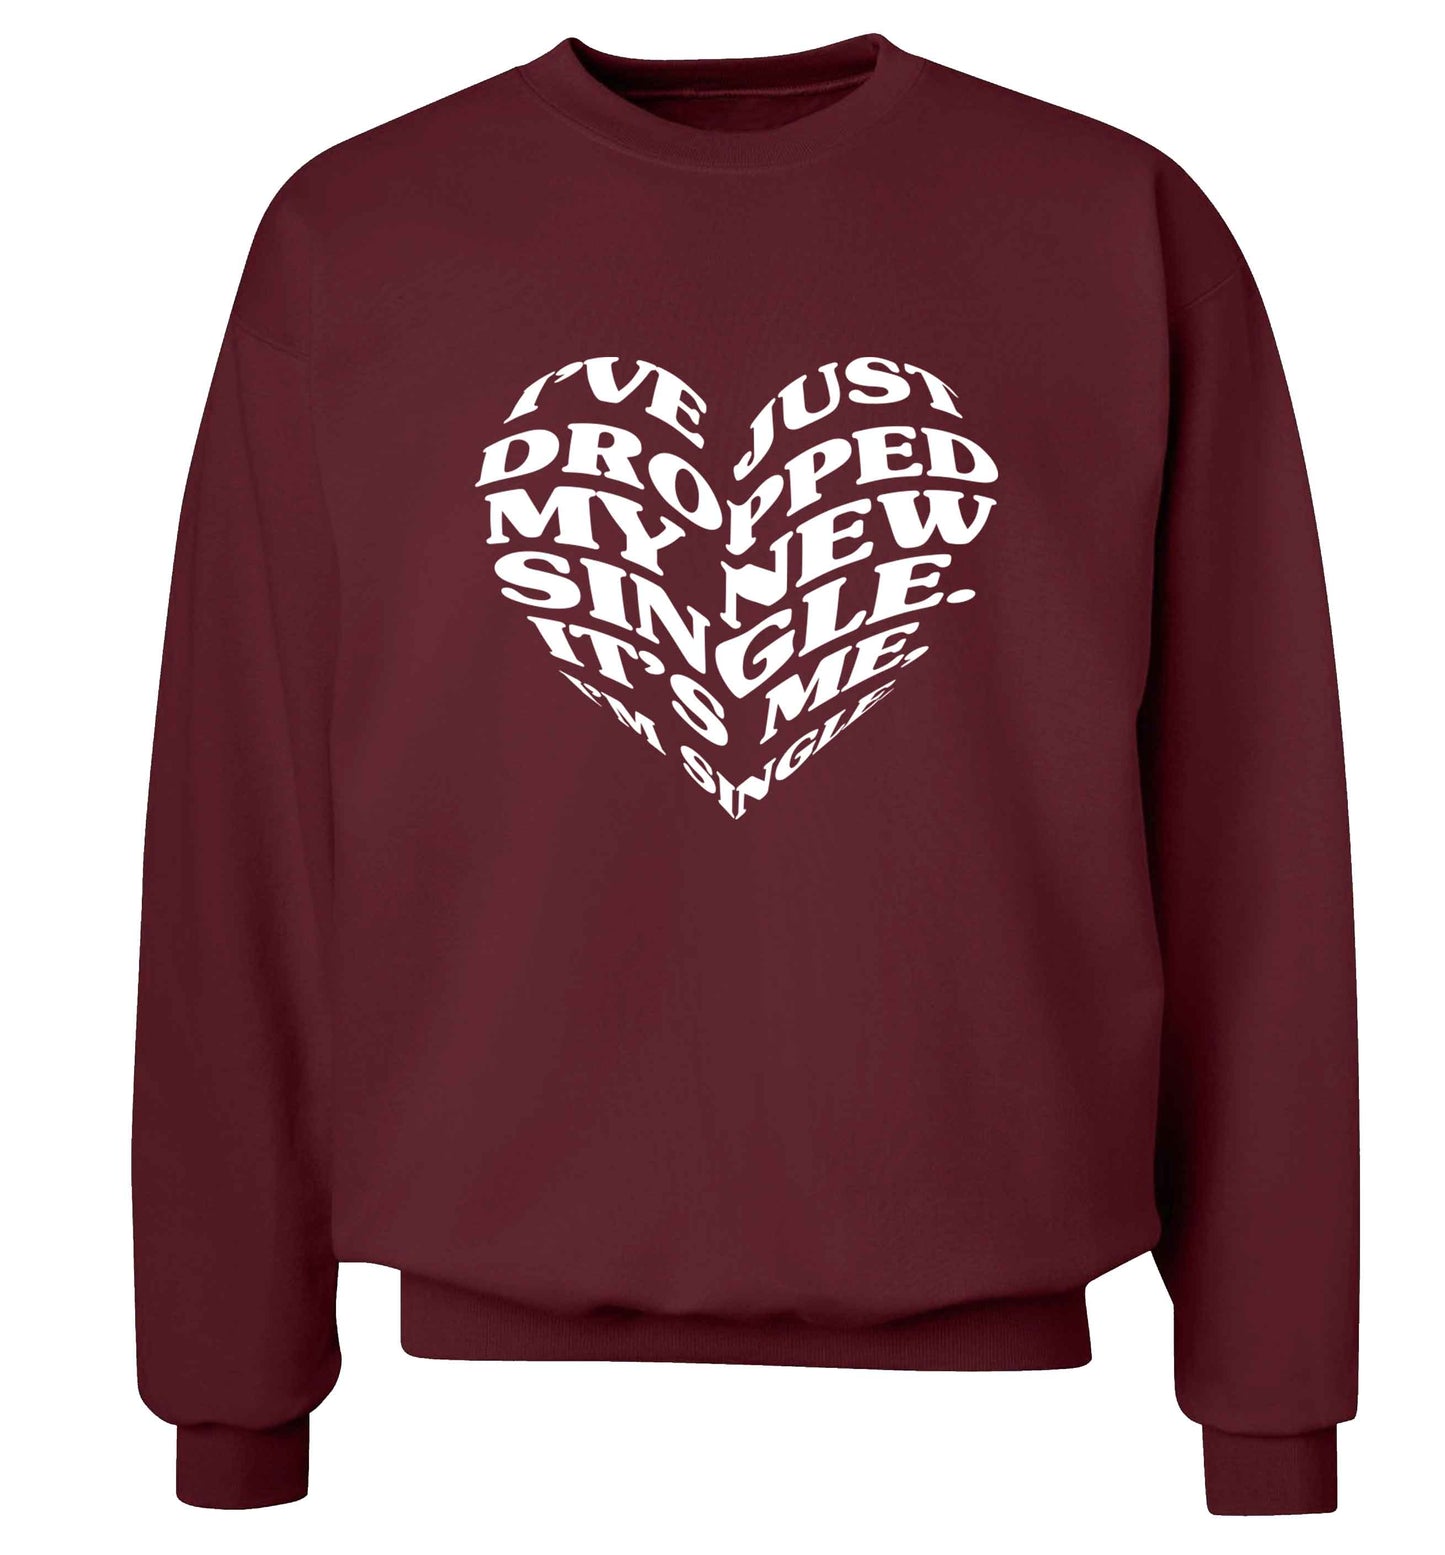 I've just dropped my new single it's me I'm single adult's unisex maroon sweater 2XL